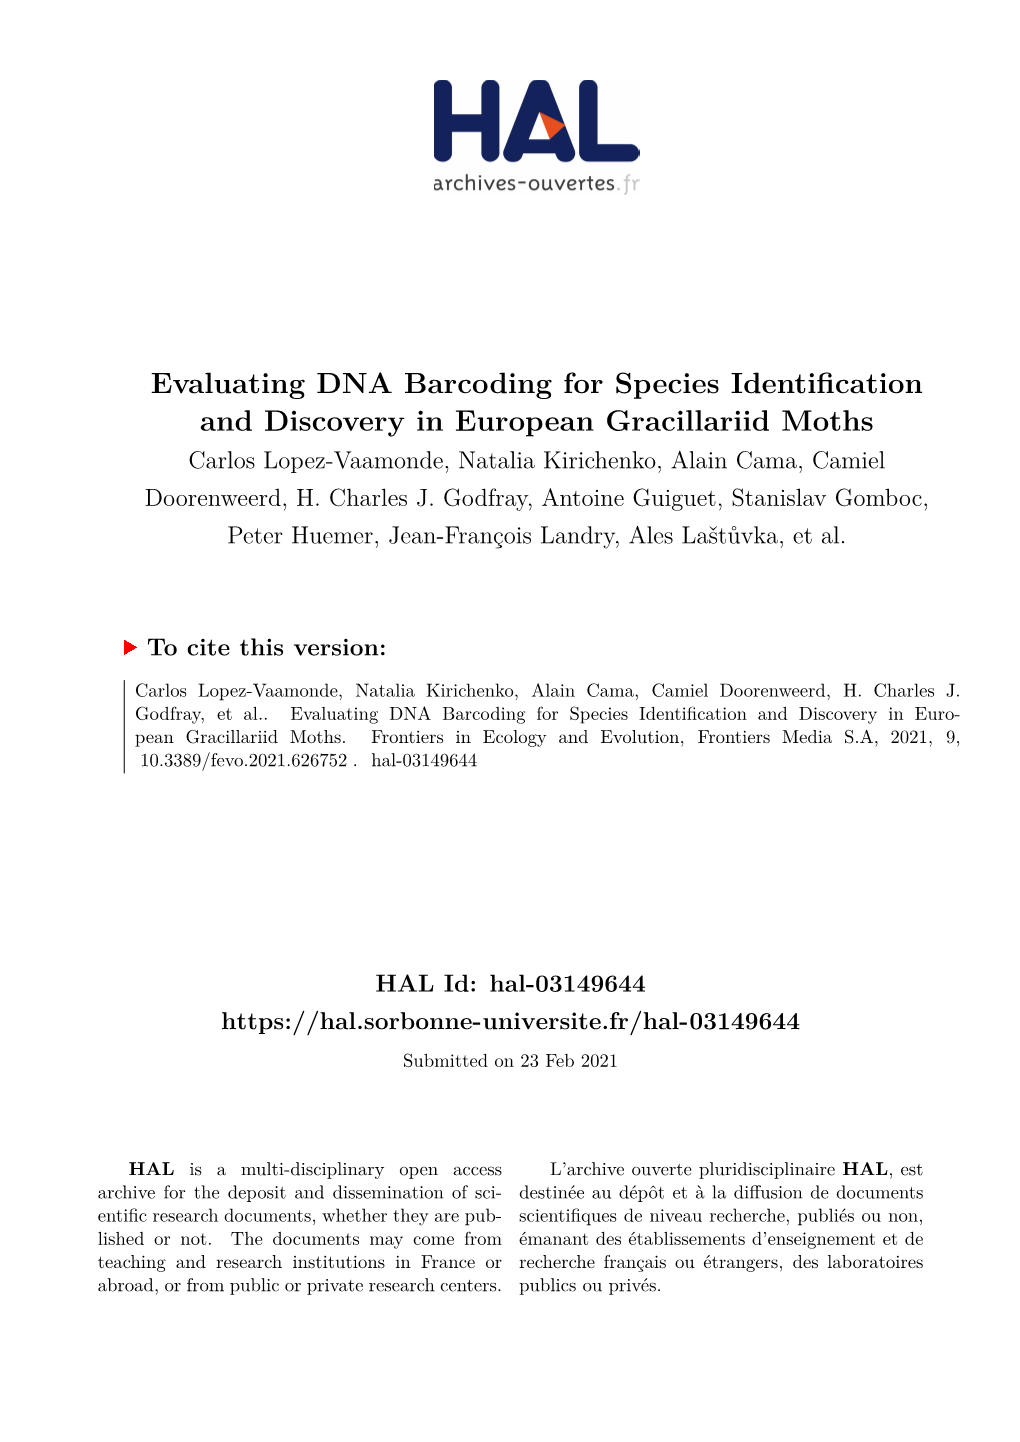 Evaluating DNA Barcoding for Species Identification And